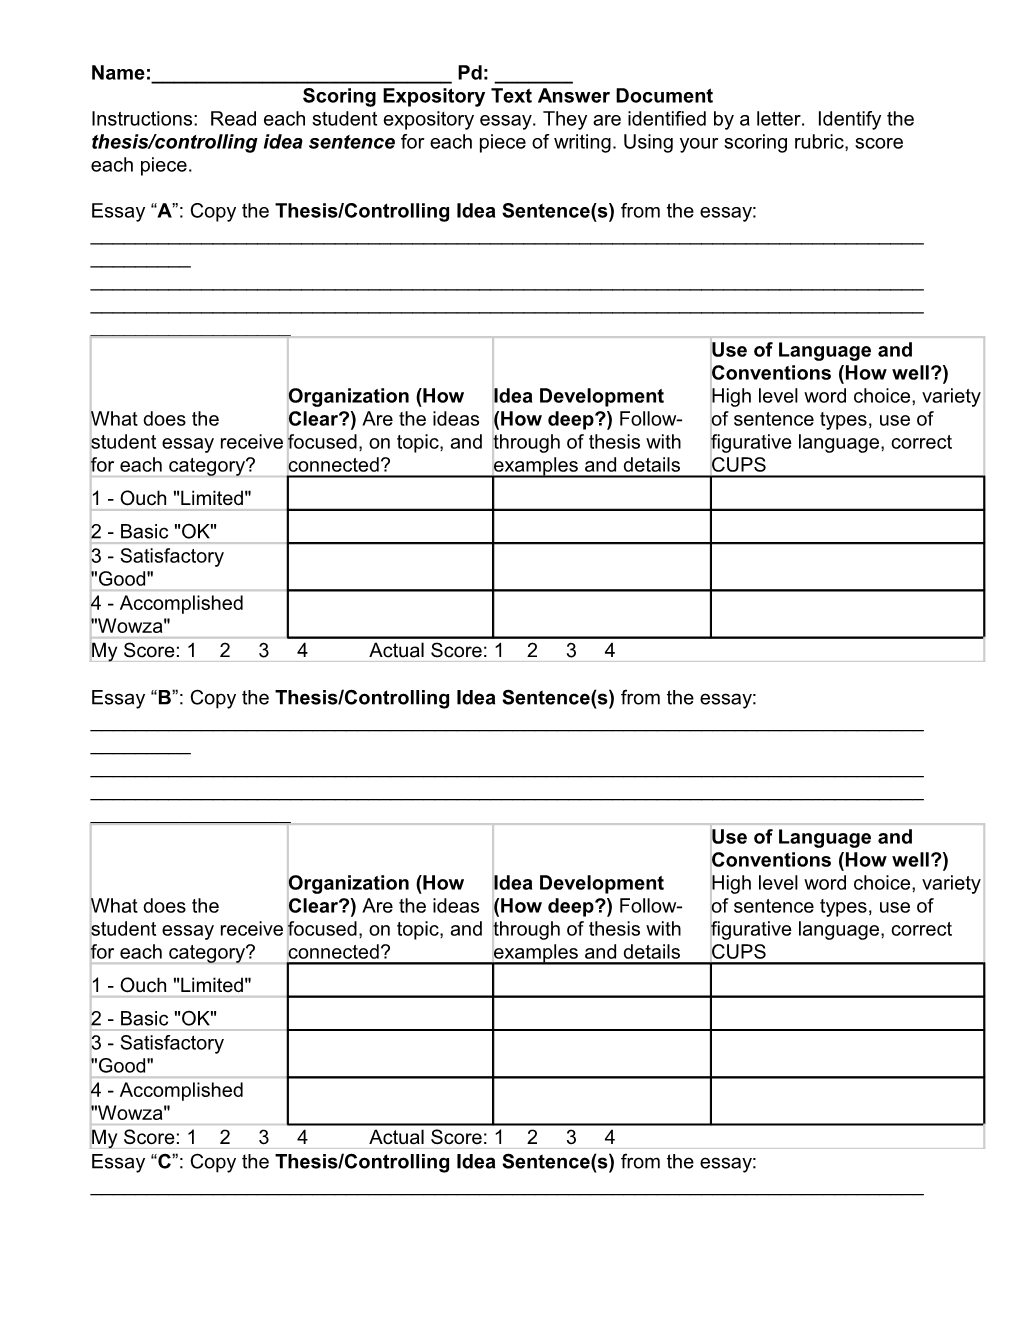 Scoring Expository Text Answer Document